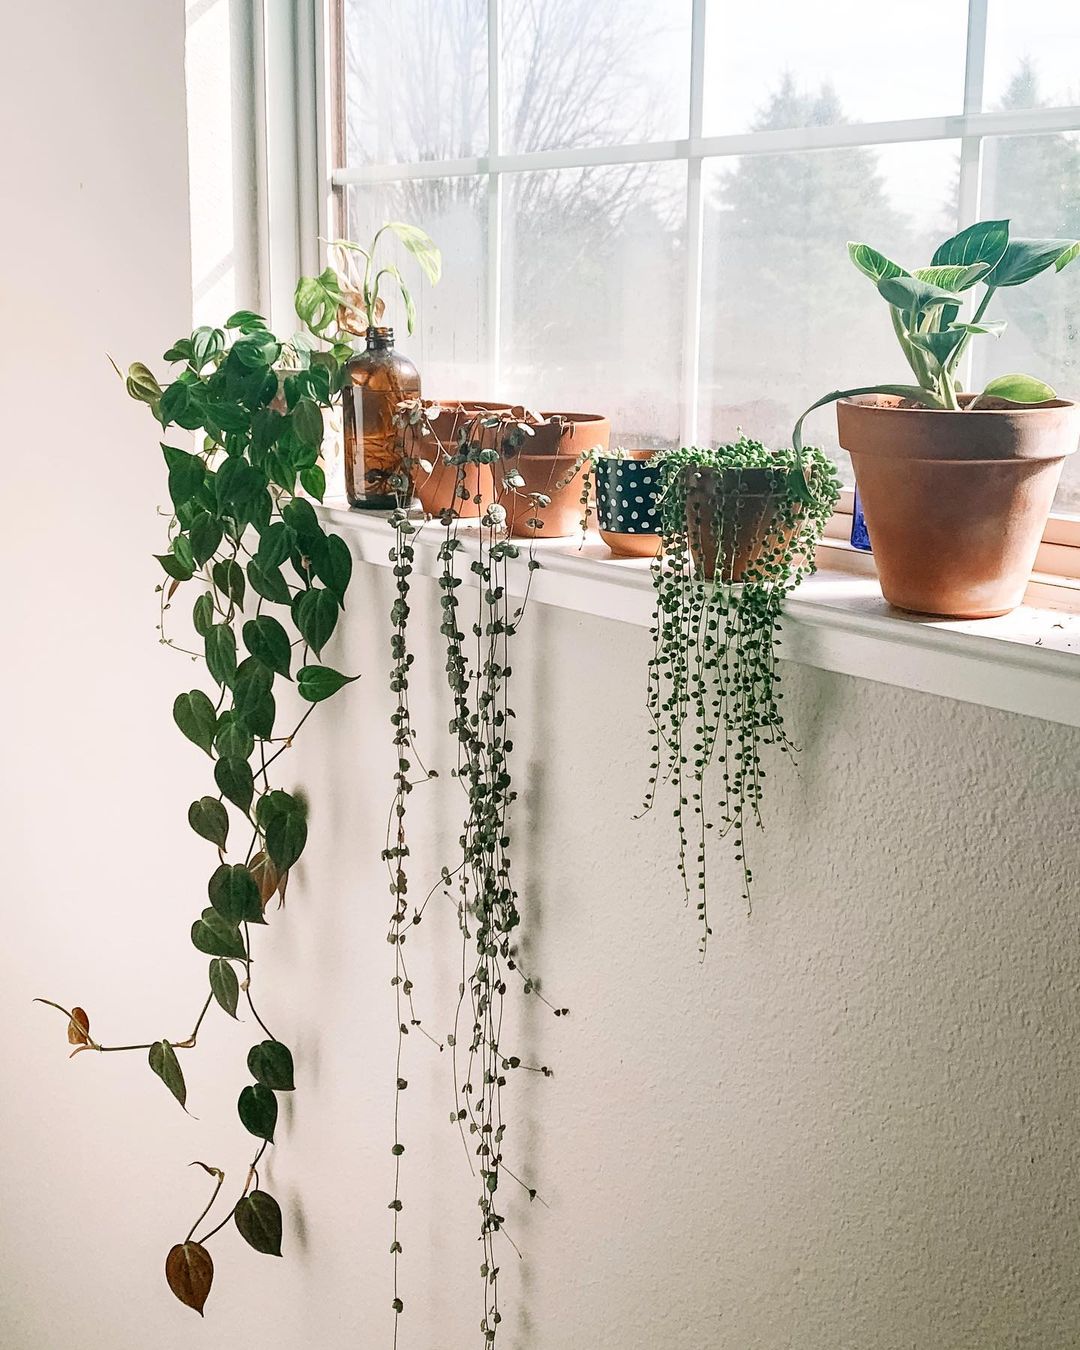 Trailing plants photoed on a windowsill. Photo by Instagram user @growing_with_jess.